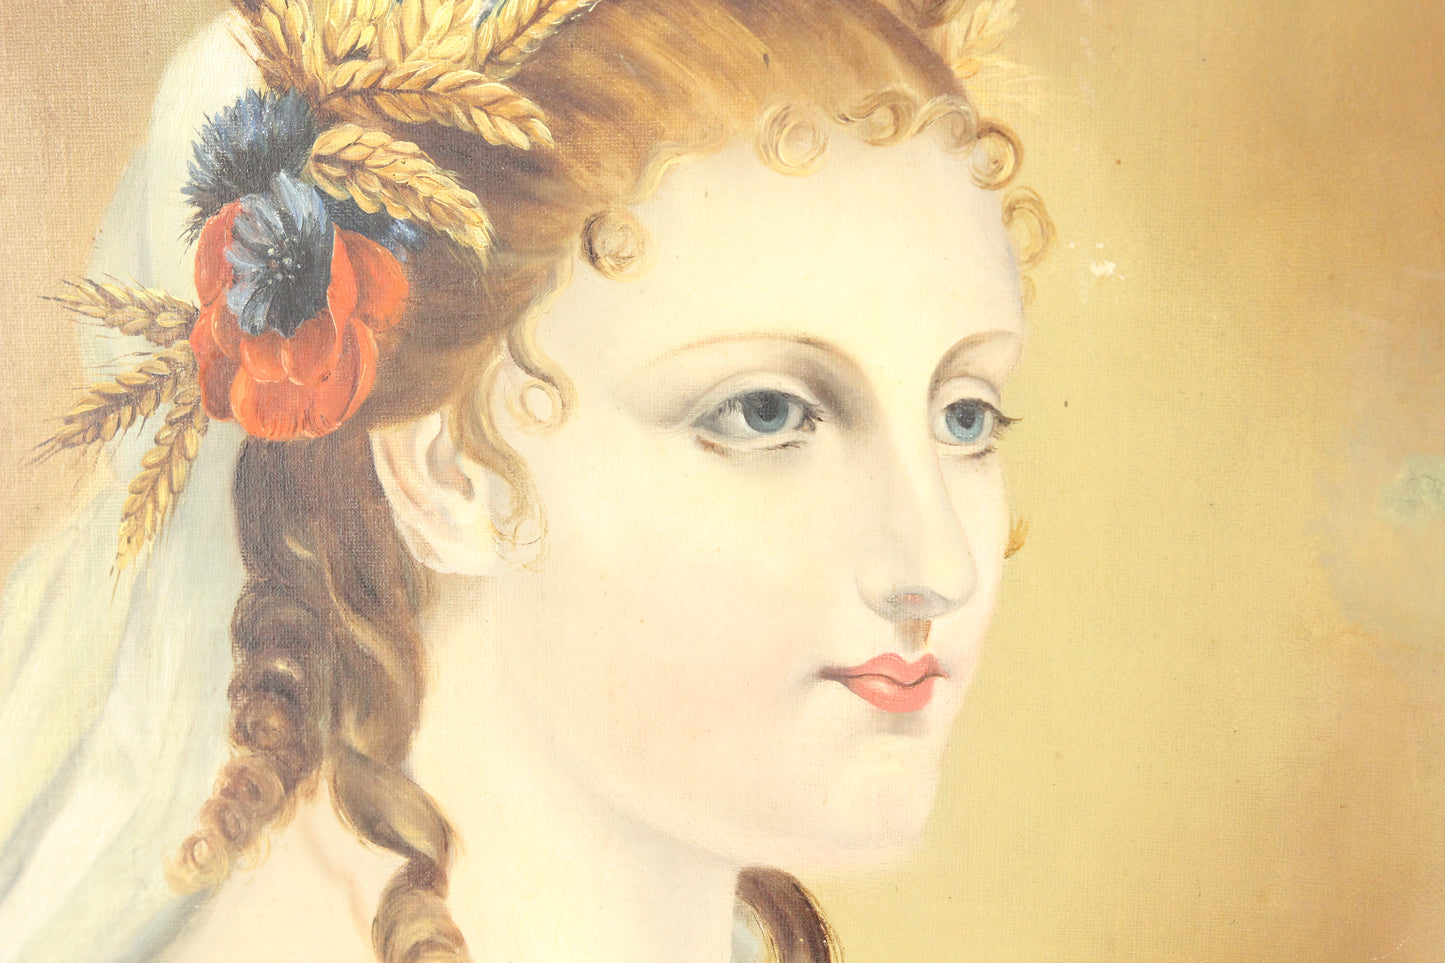 Victorian Oil on Canvas Painting of a Goddess, Attributed to Mrs. D. White - 14 x 21"